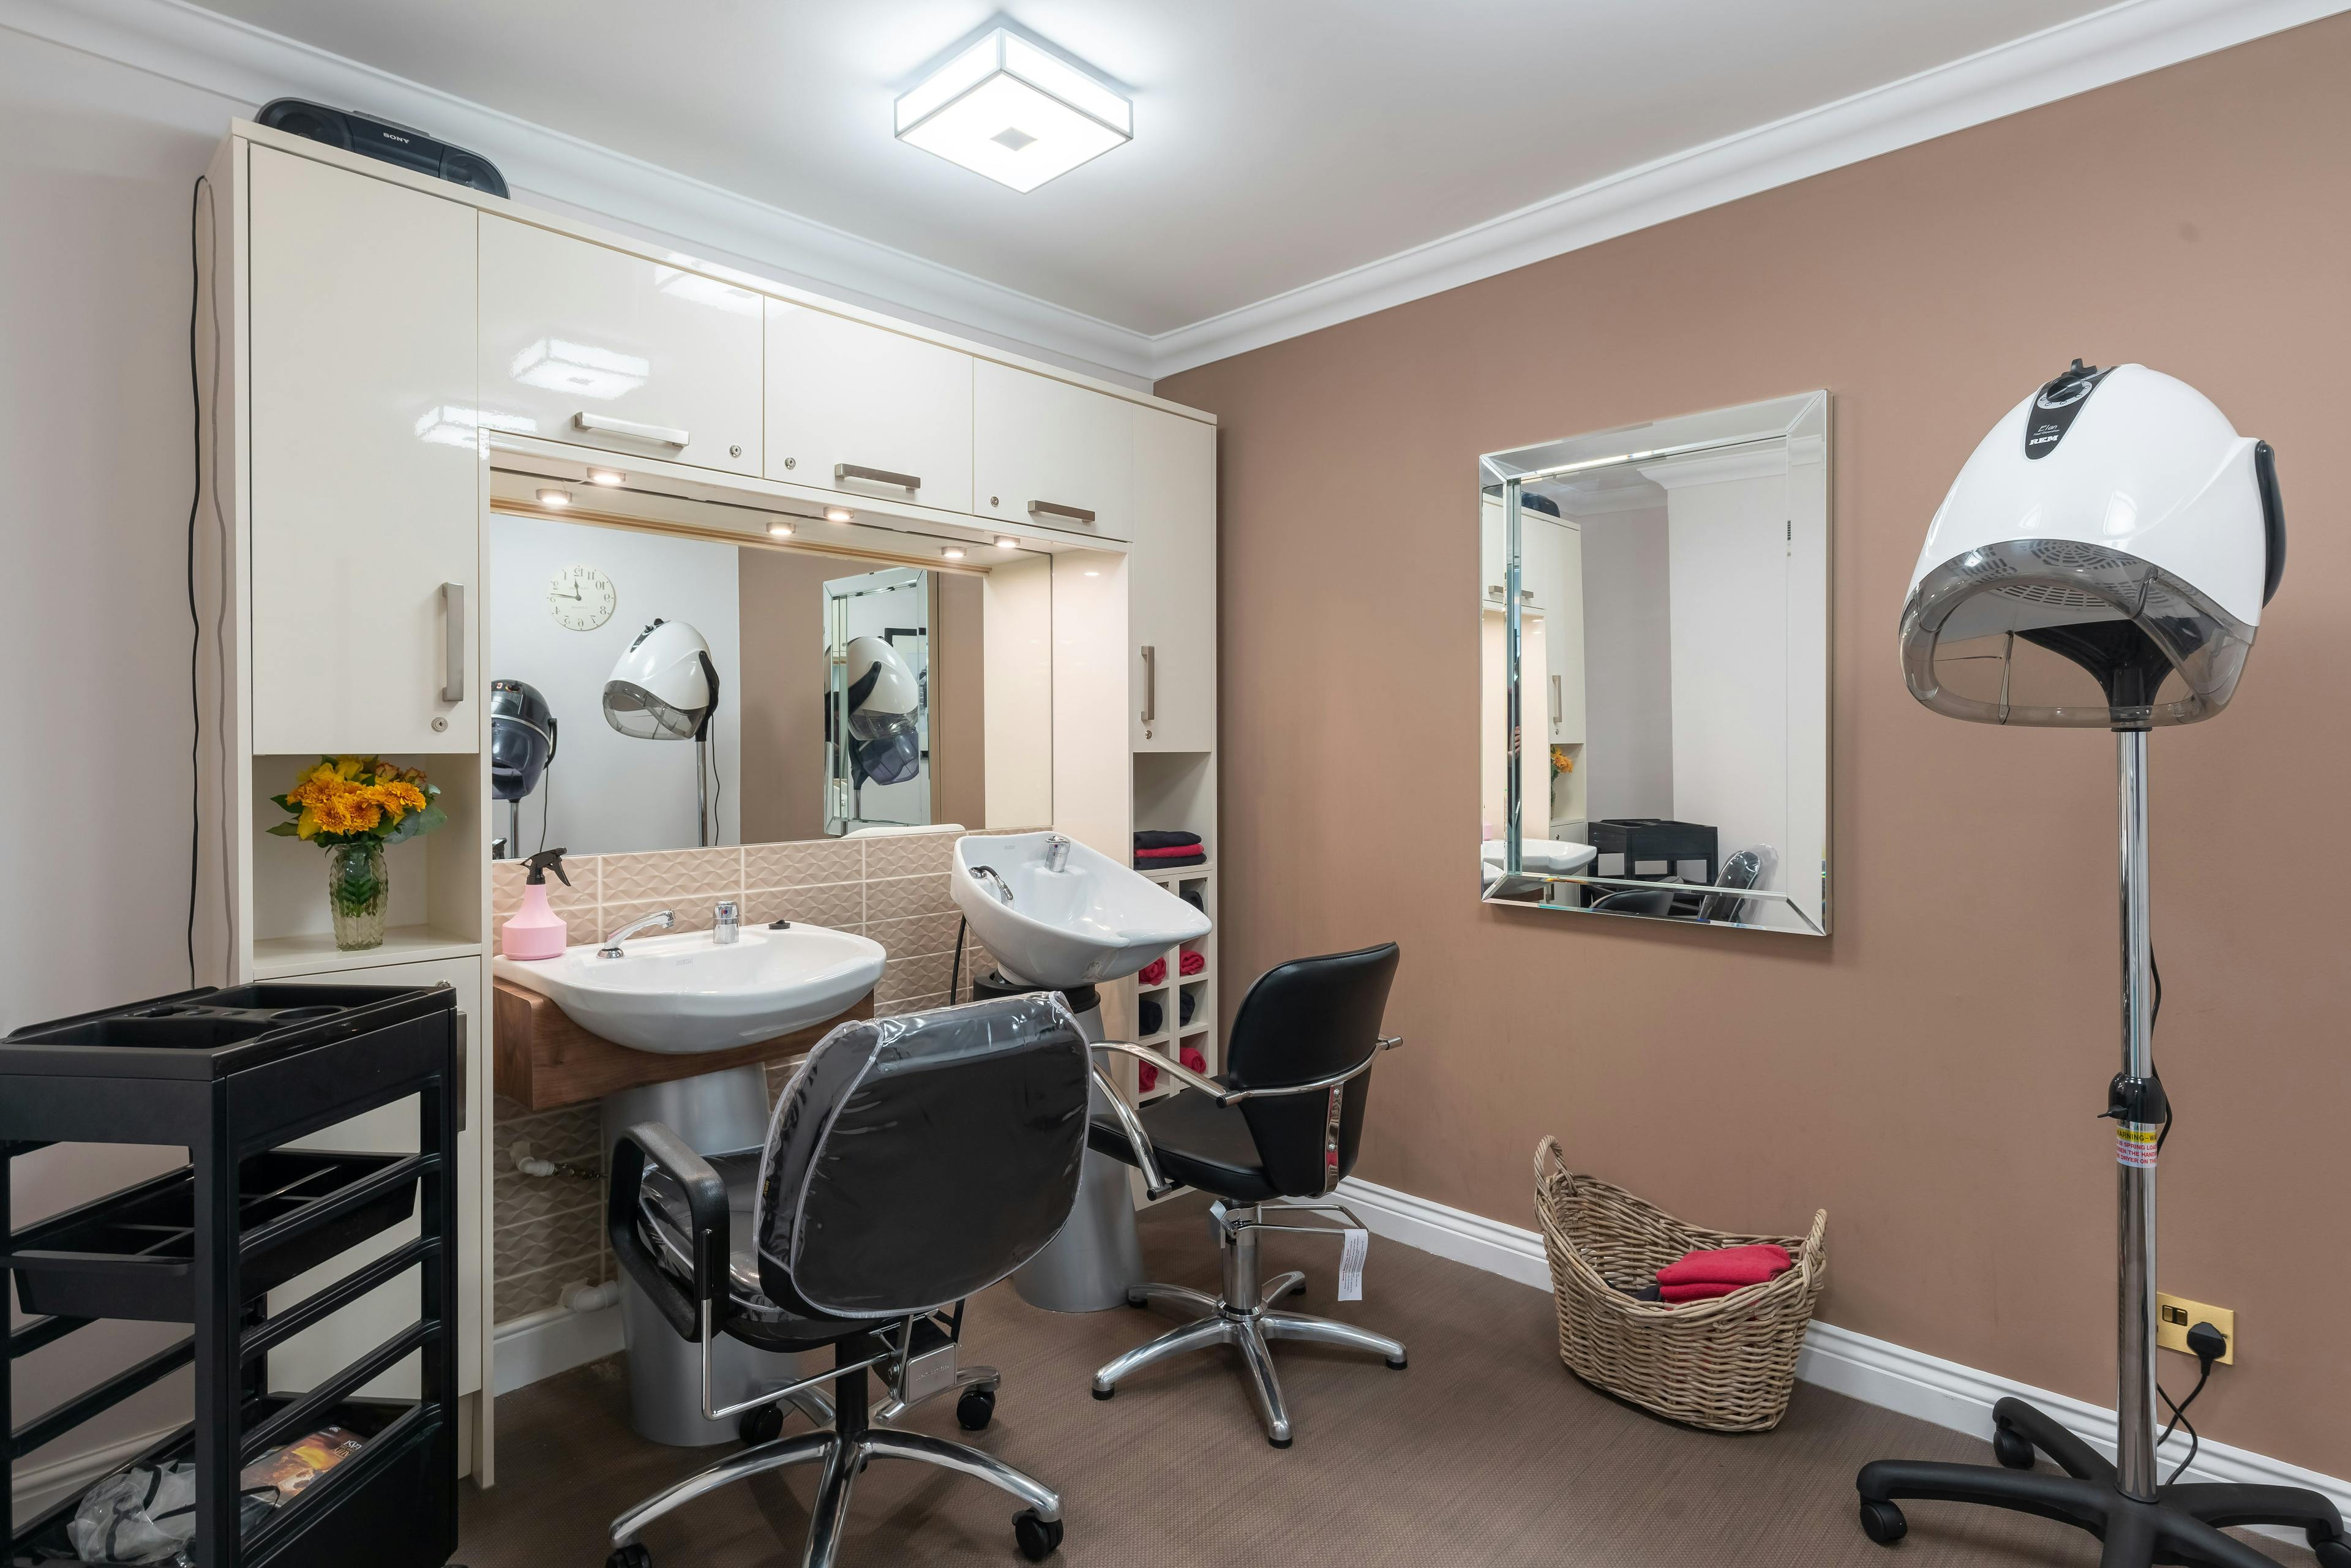 Salon at Tandridge Heights Care Home in Oxted, Surrey